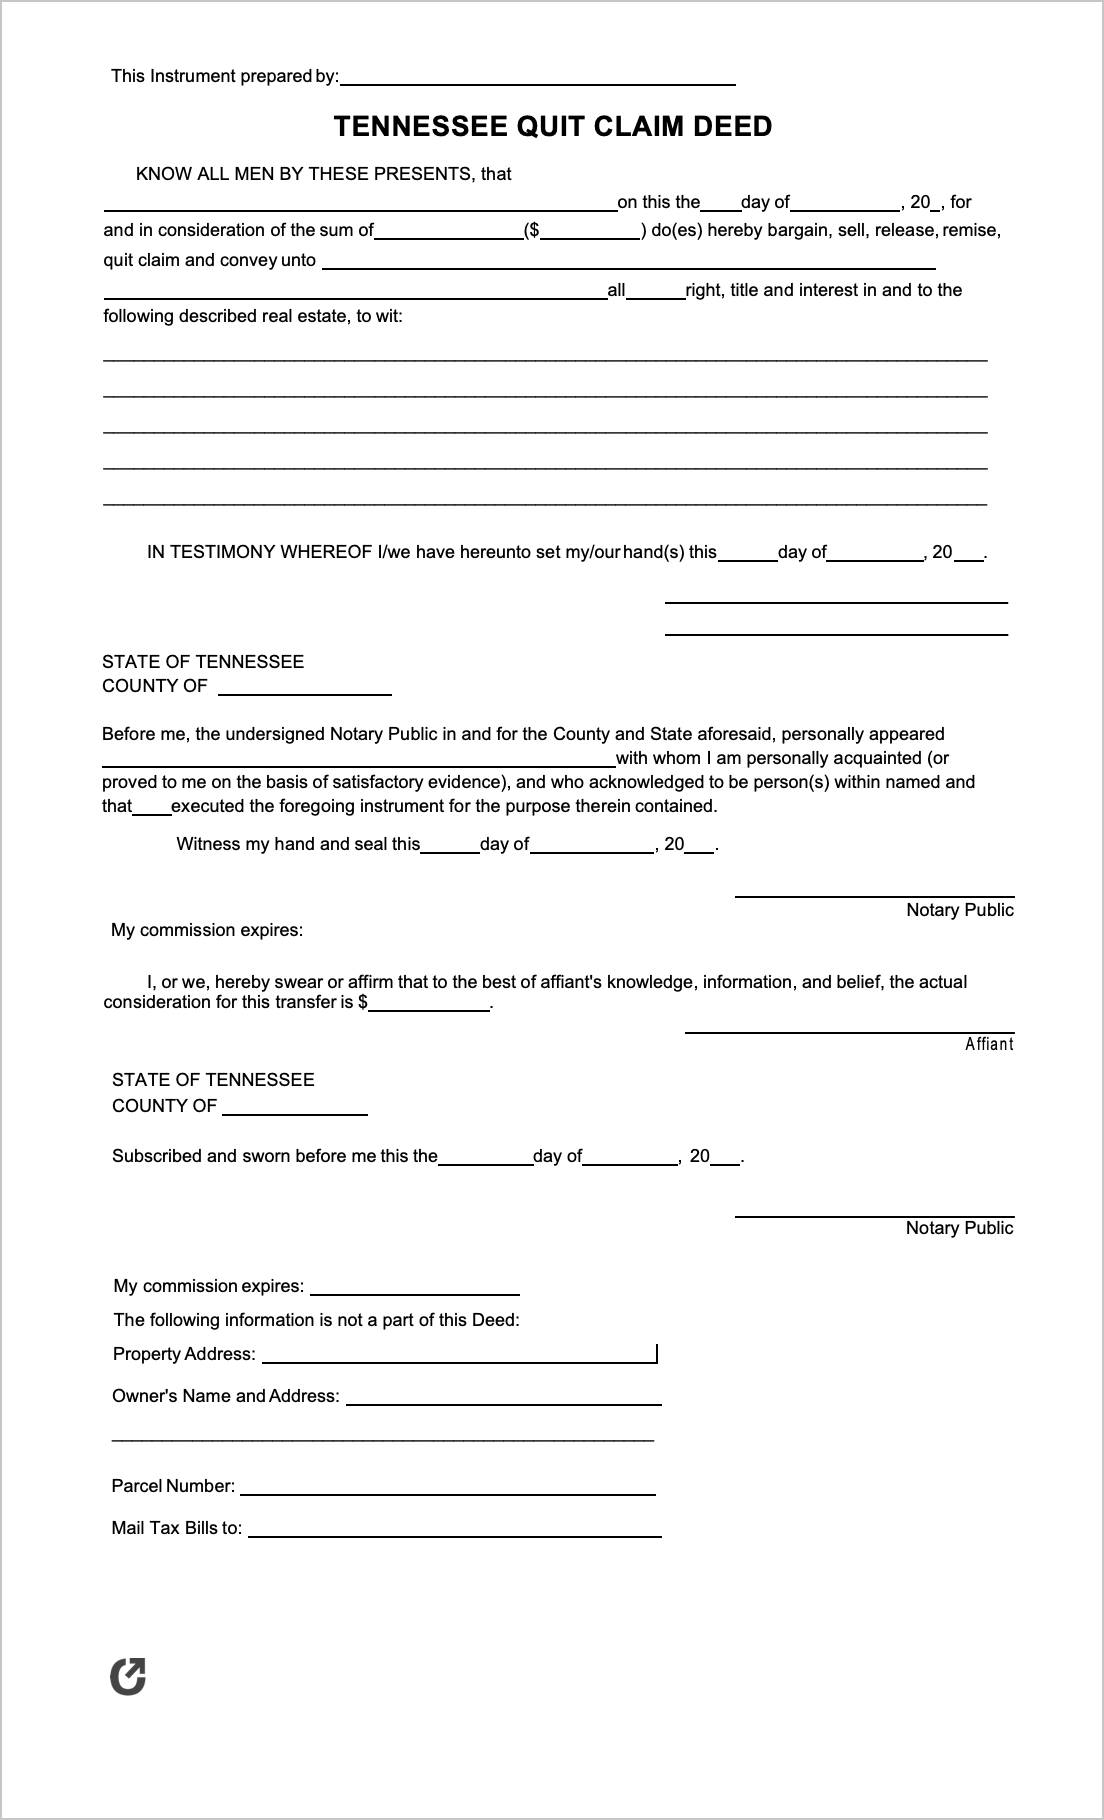 free-printable-quit-claim-deed-form-tennessee-printable-forms-free-online